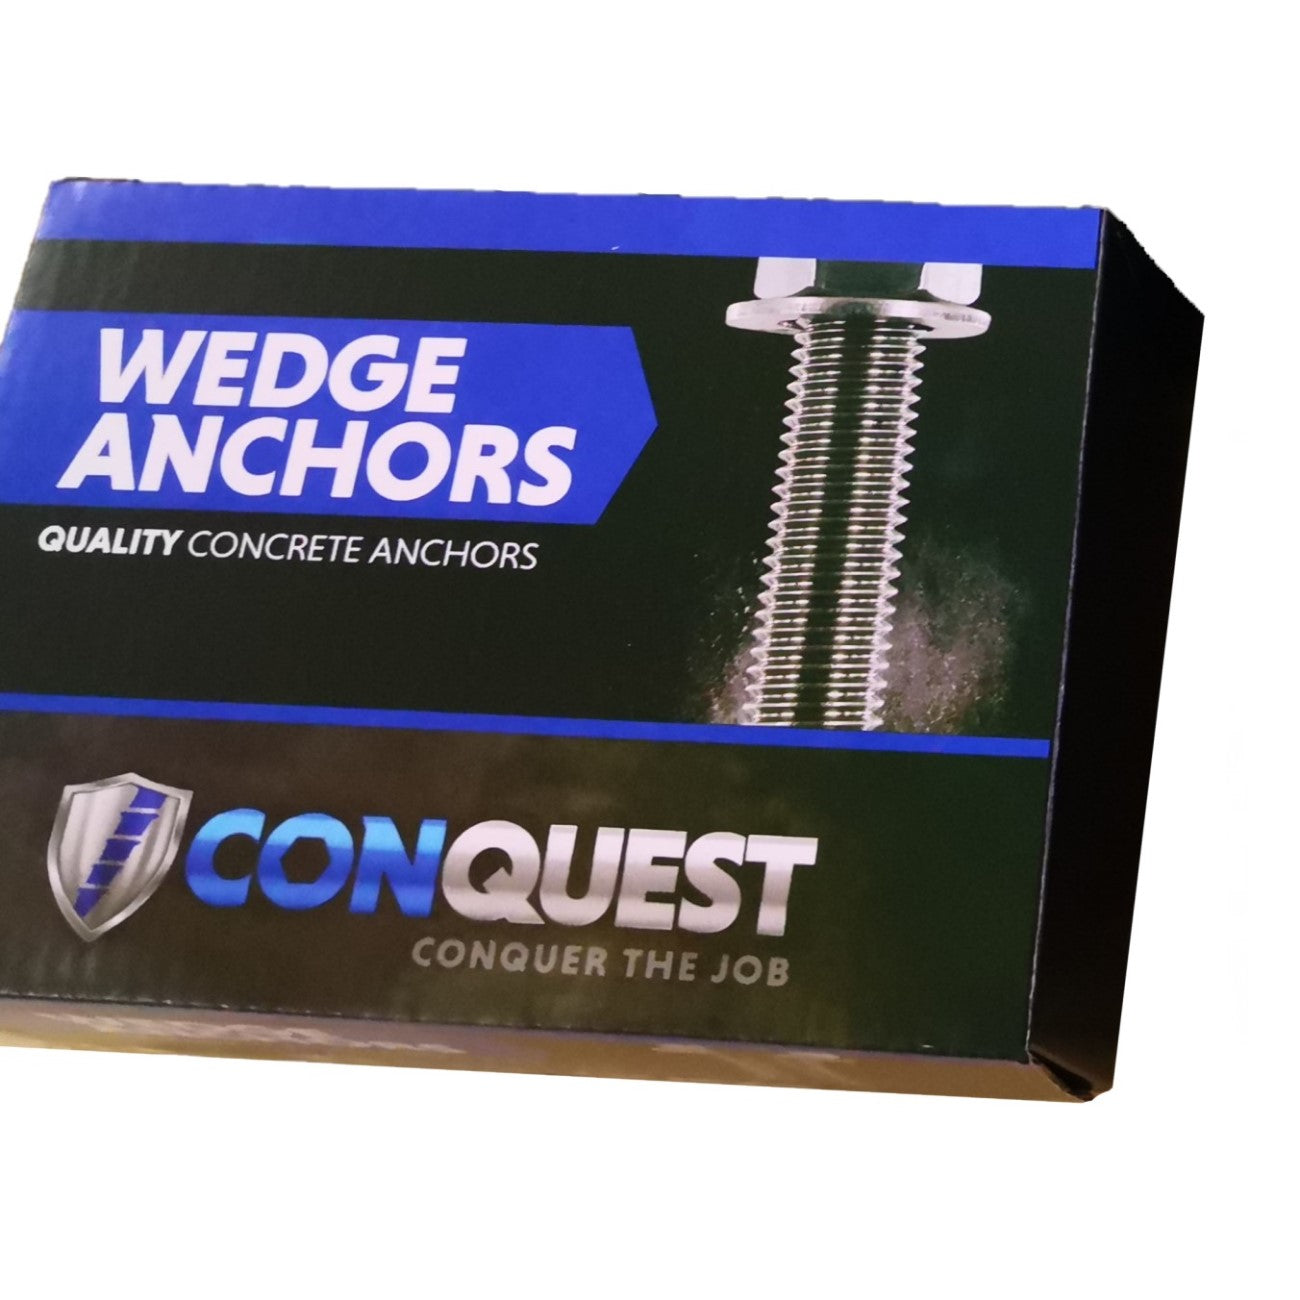 1/4" x 2-1/4" Conquest Wedge Anchors - 316 Stainless Steel, Pkg 100